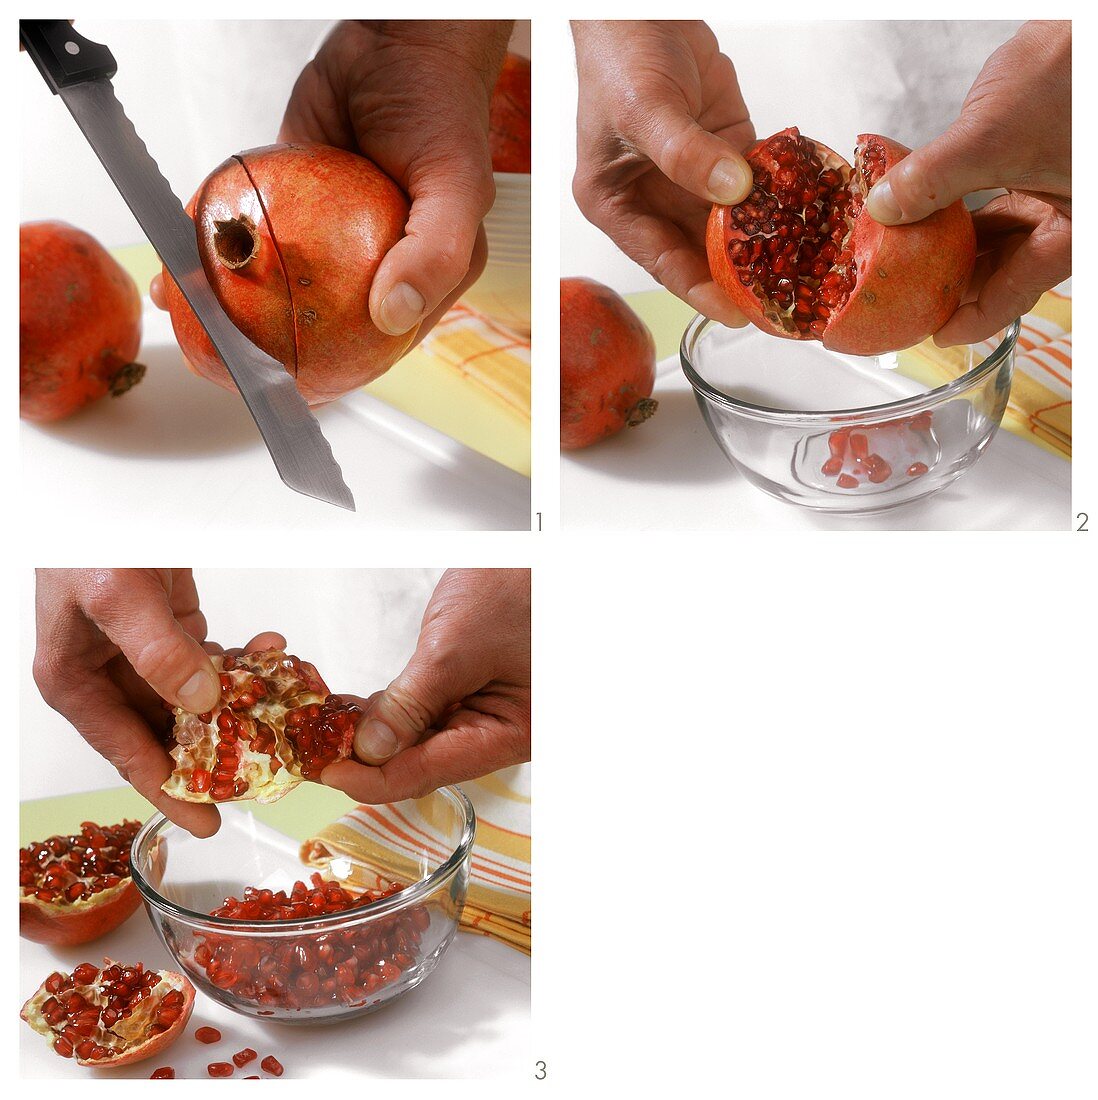 Cutting up a pomegranate and removing the seeds